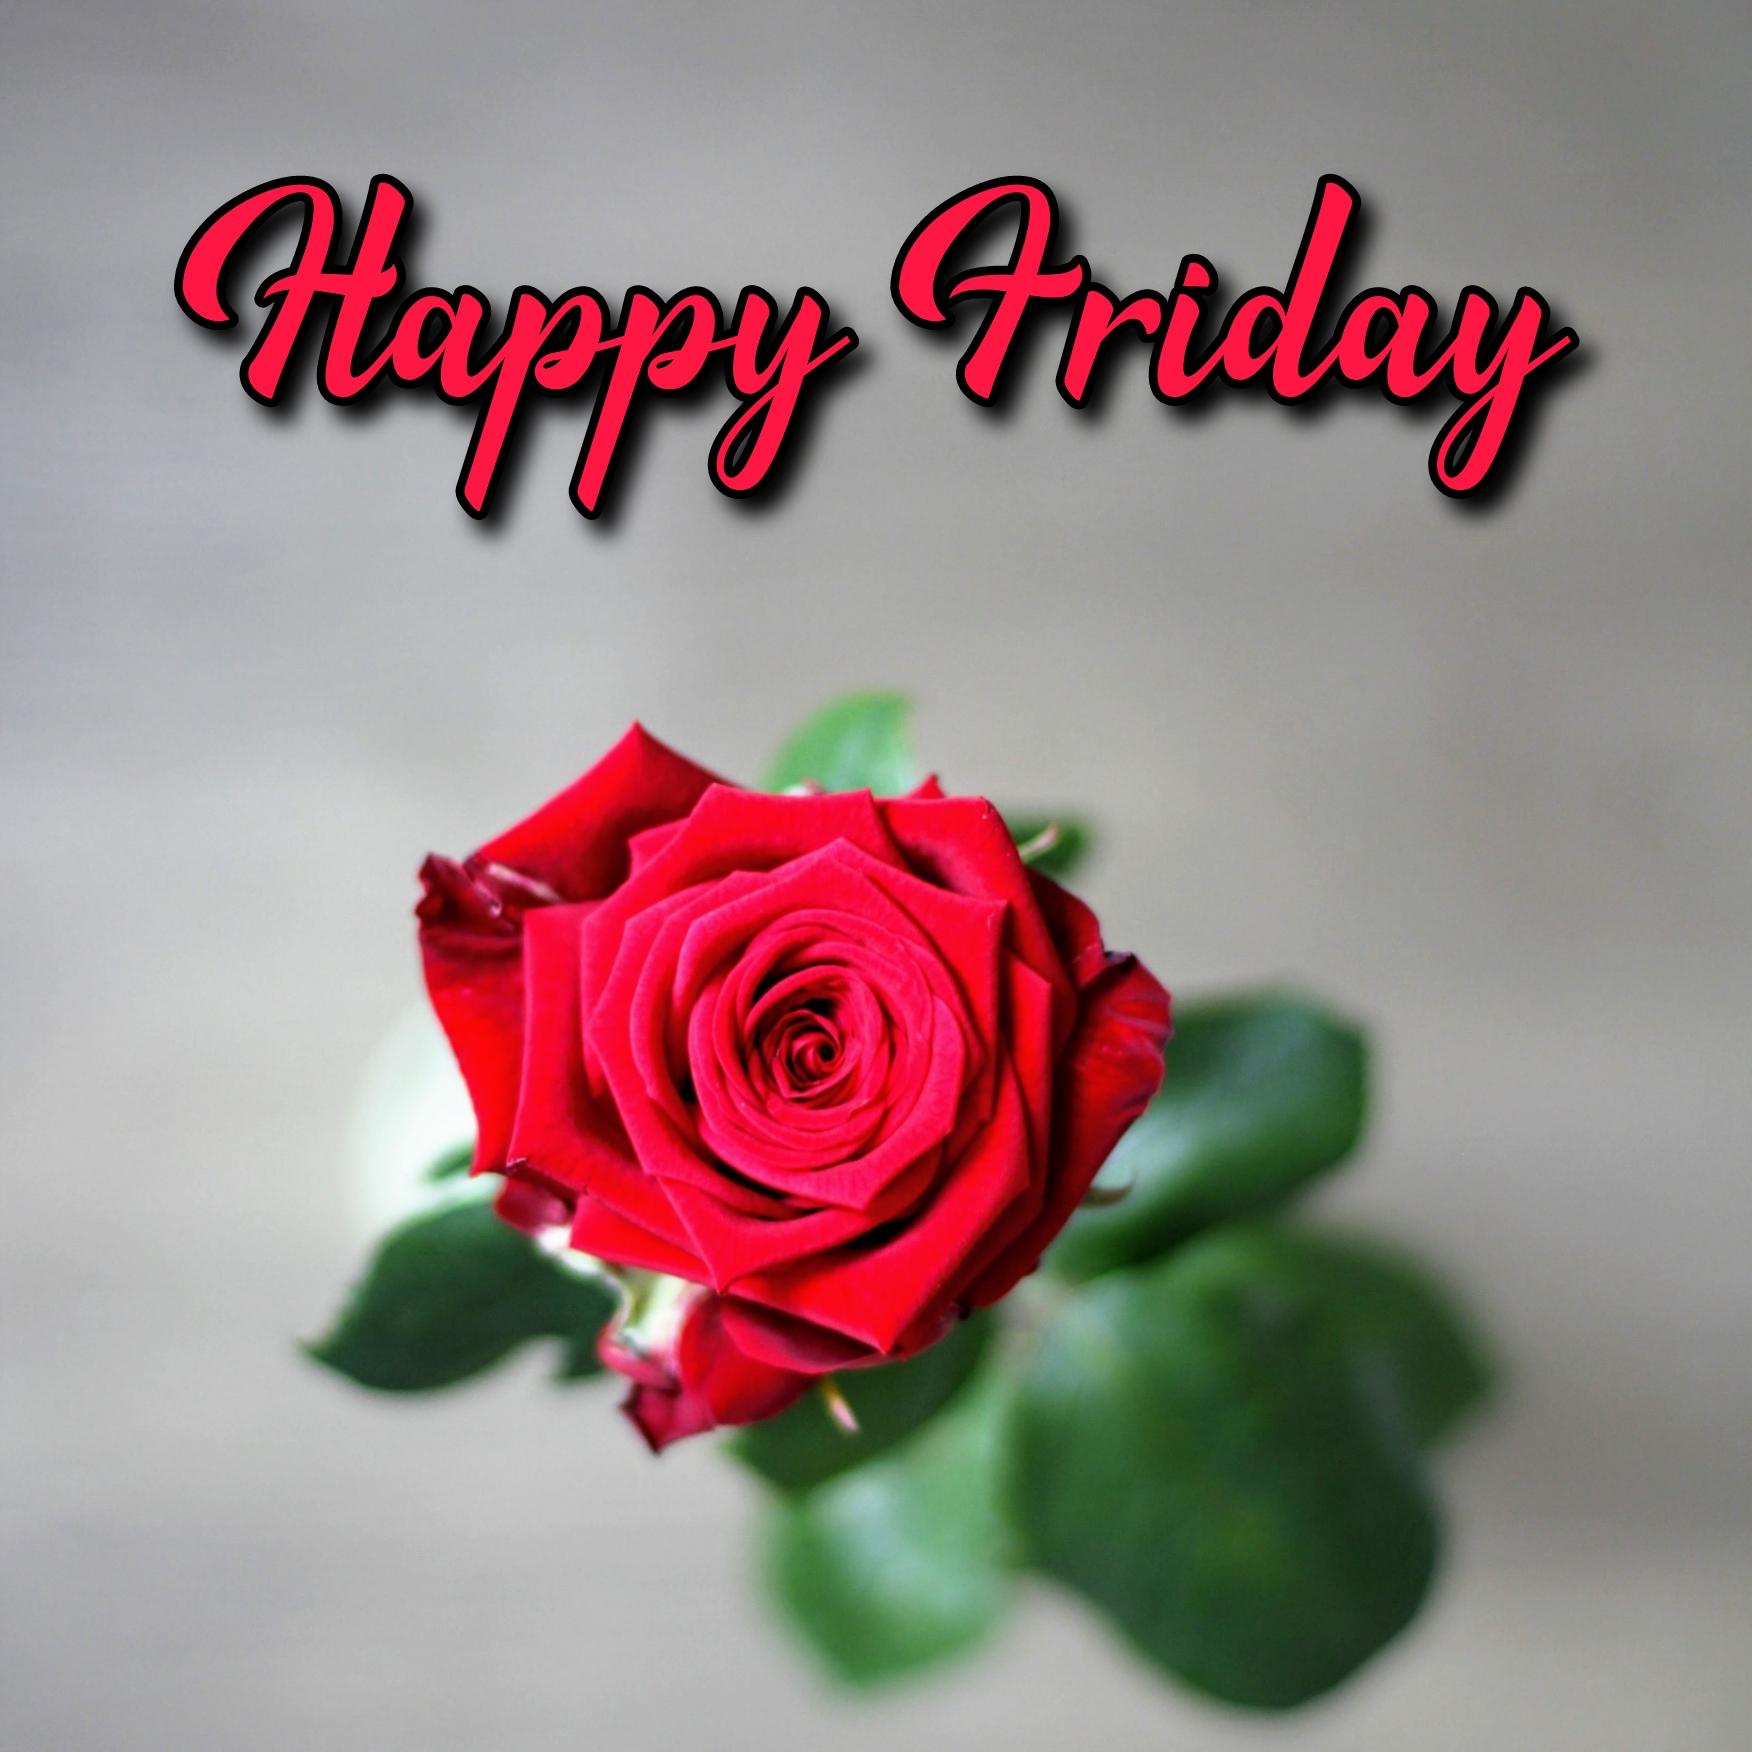 Happy Friday Rose Images